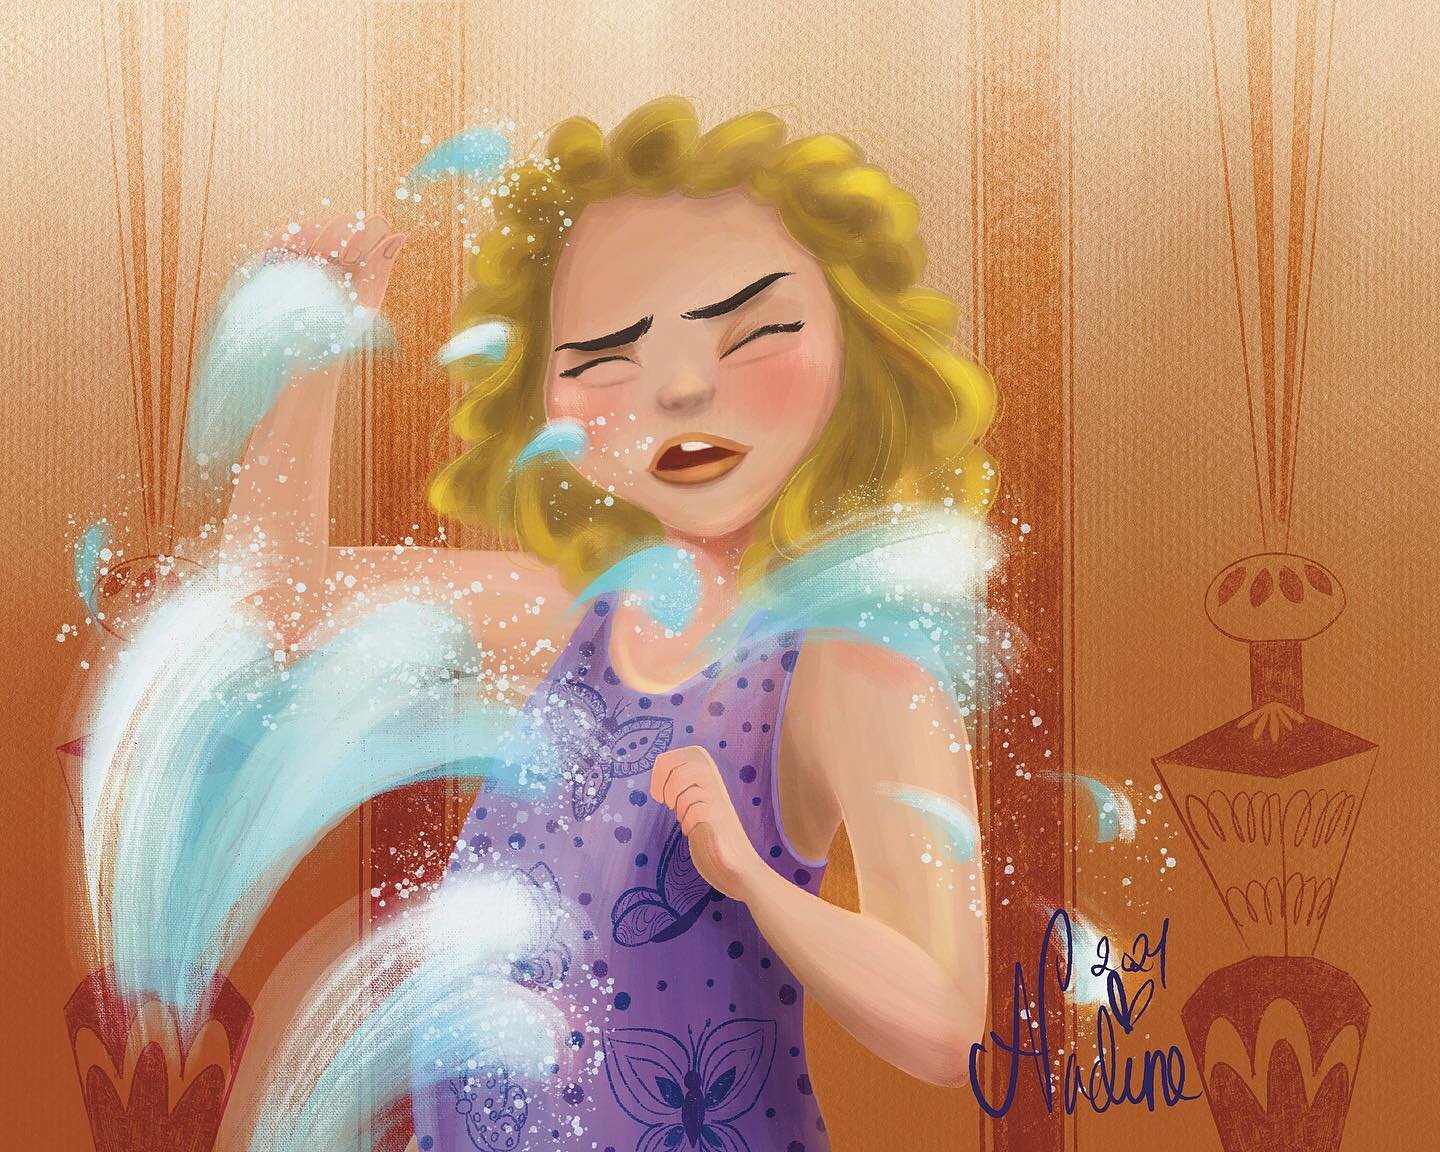 SPLASH 💦 because who has never been splashed?
💧 
Drawing children&rsquo;s facial expression is harder then it looks because you want to limit the lines or it ages the child character- I was fussing around this for so long.
#childhoodweek #nadineayd